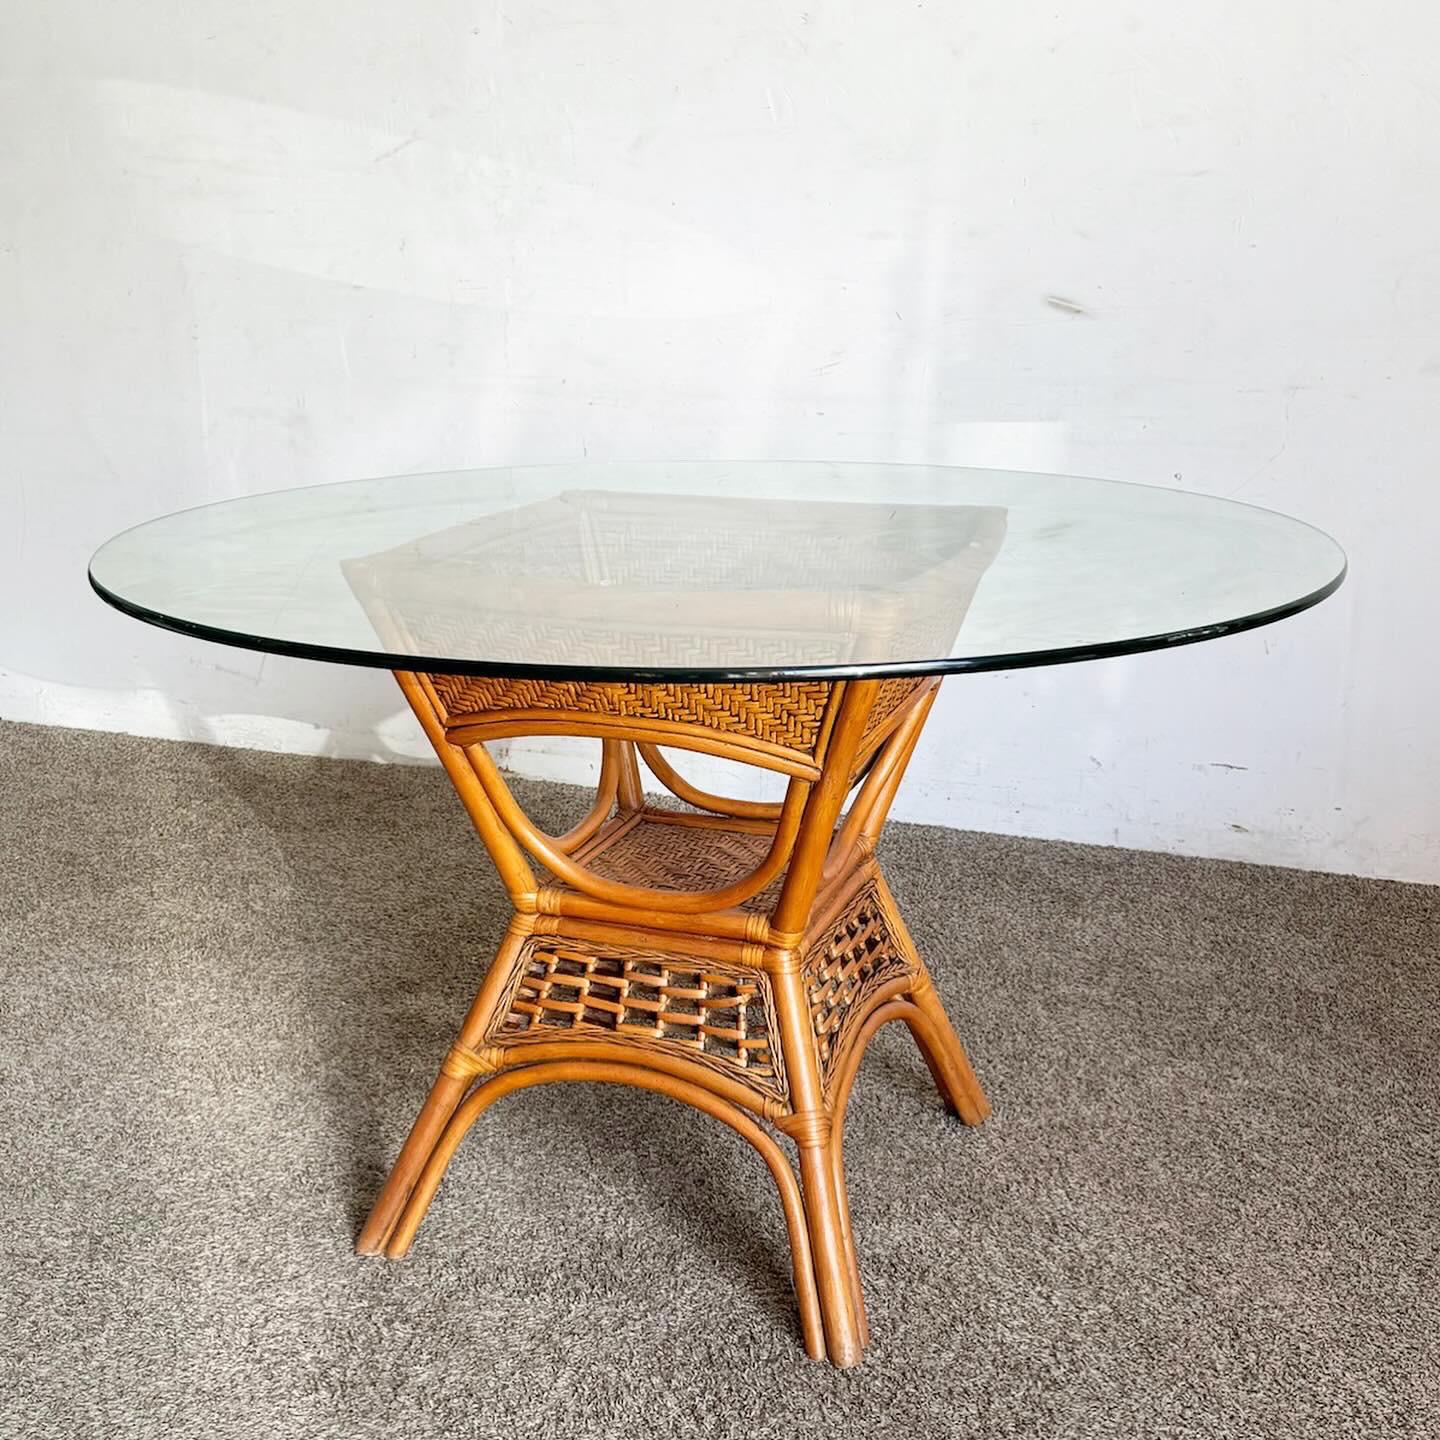 Experience a blend of natural elegance and contemporary style with the Boho Chic Bamboo and Rattan Glass Top Dining Table. Featuring a bamboo and rattan base and a modern clear glass top, this table is a perfect centerpiece for any dining setting.